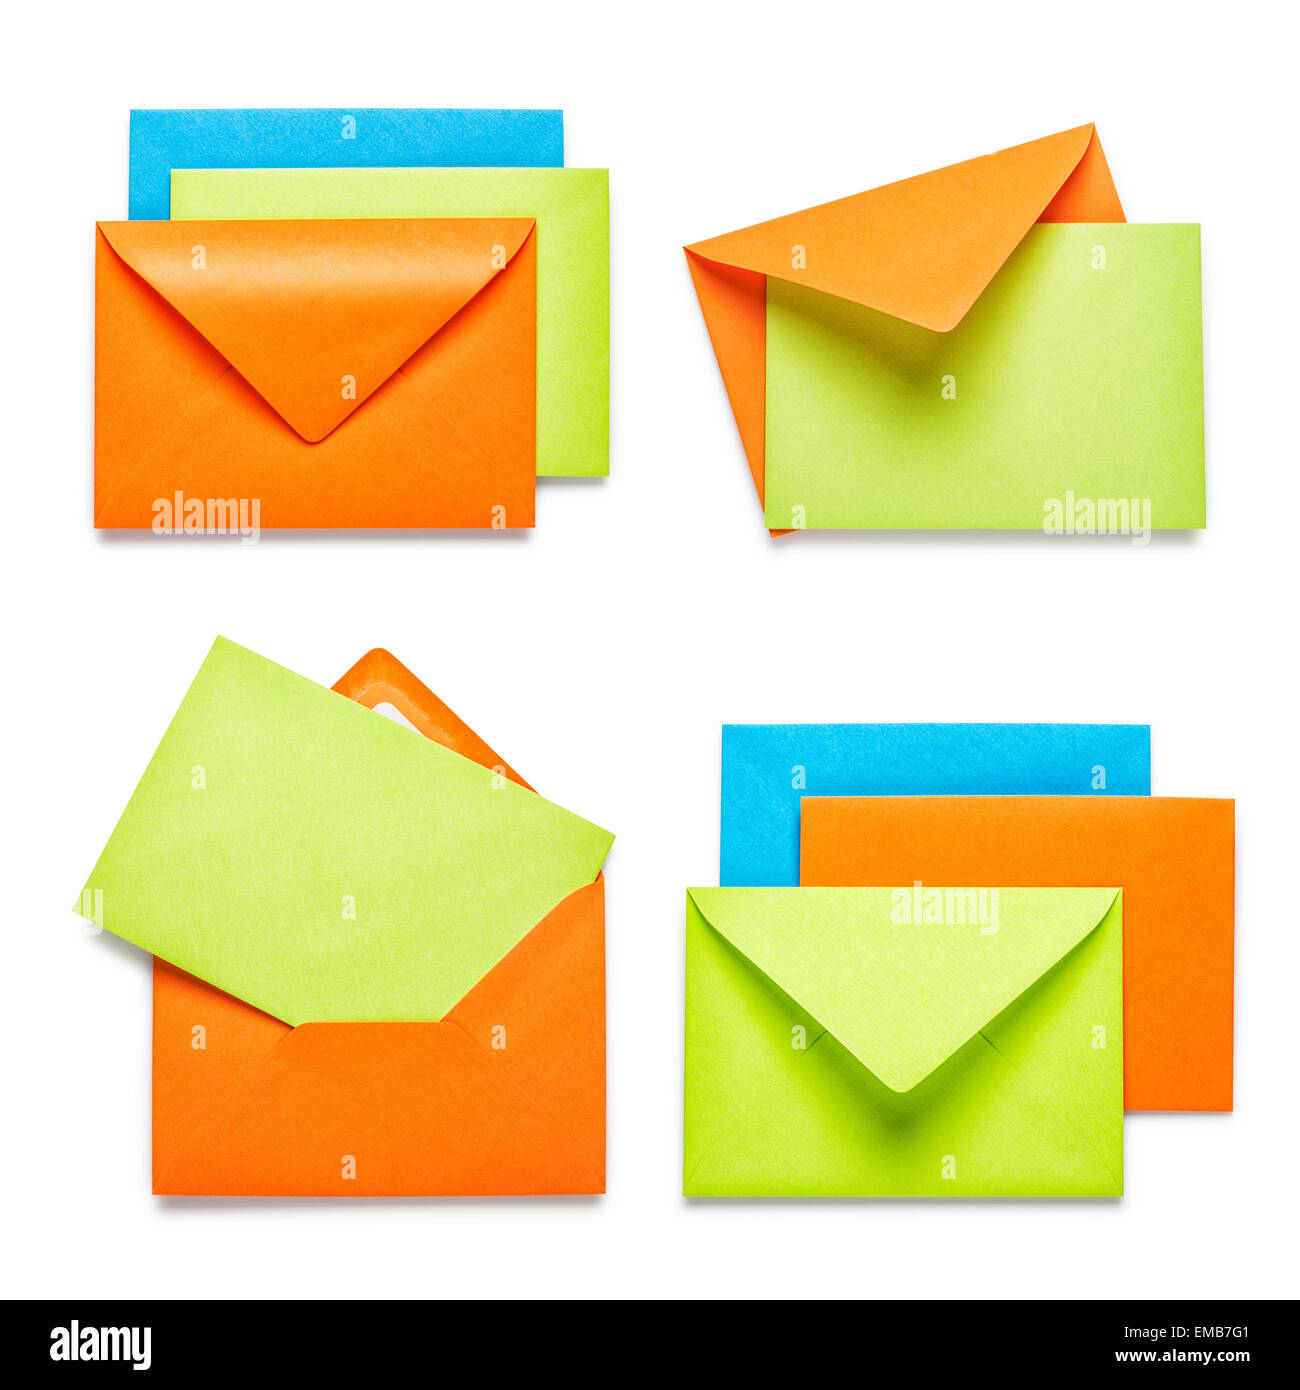 Orange envelopes with green card collection isolated on white background Stock Photo